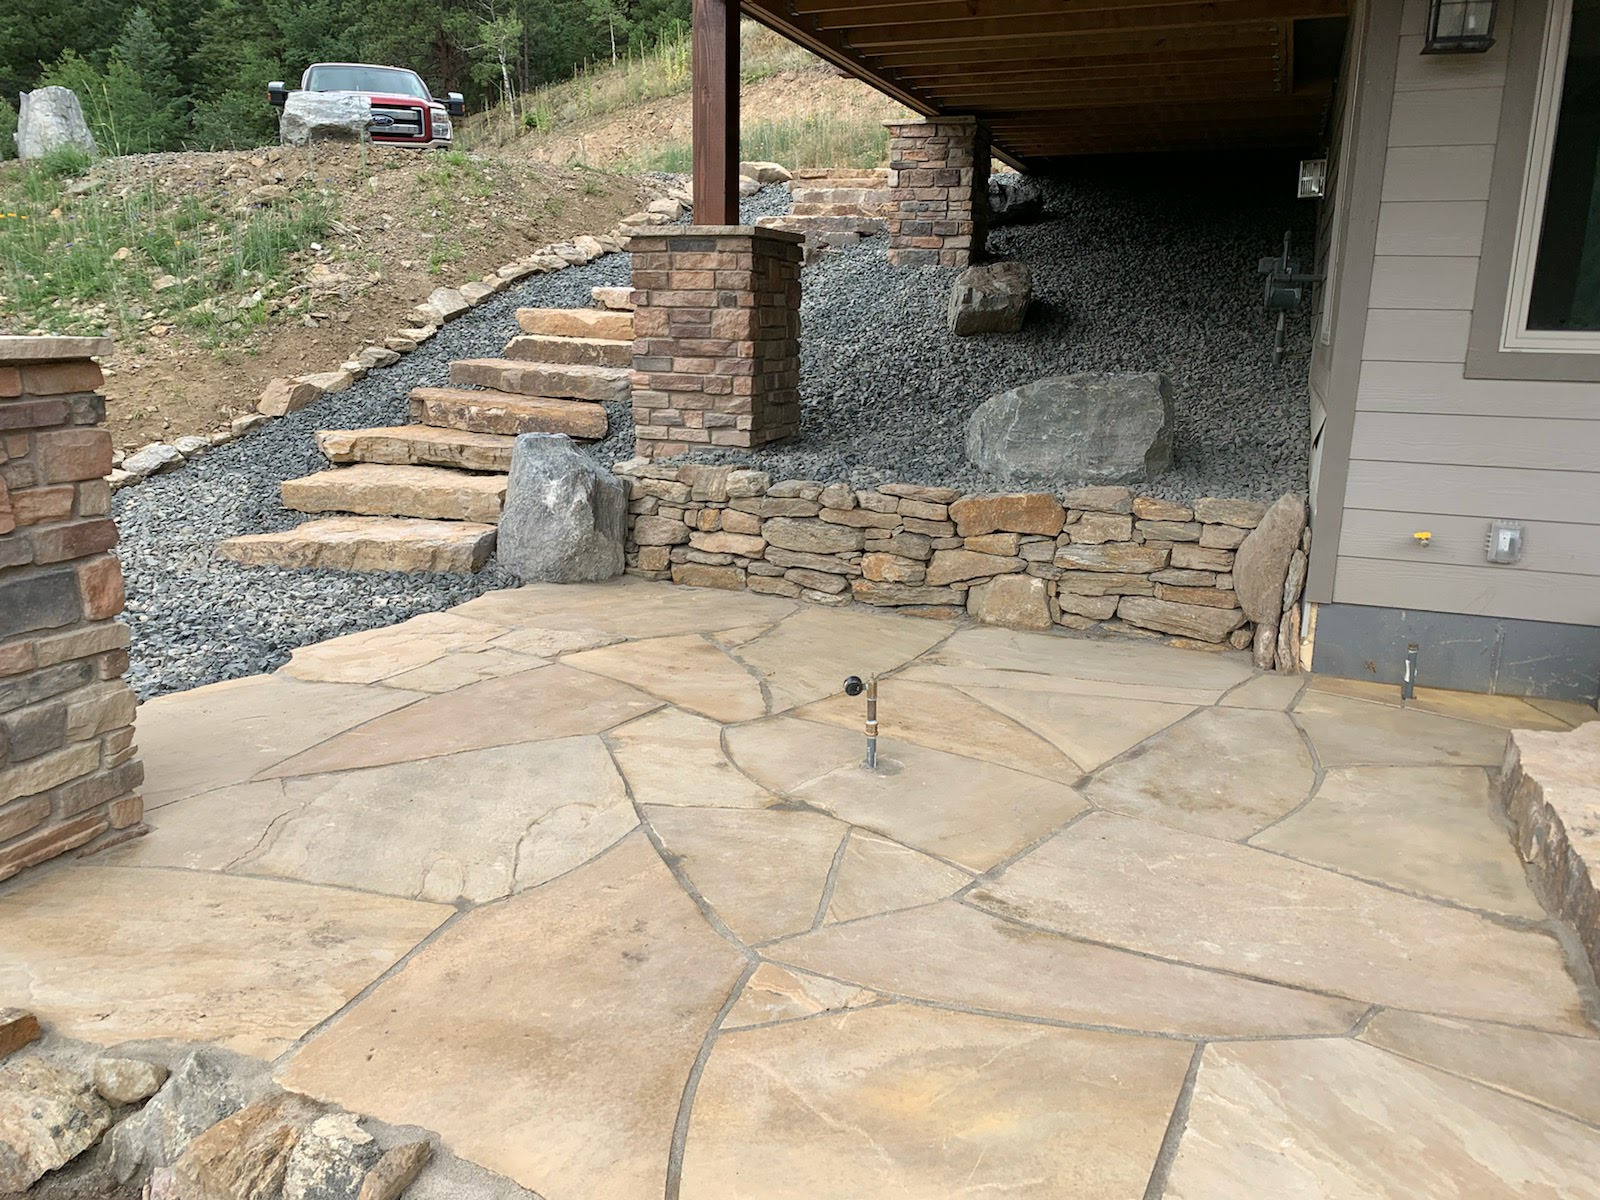 Covered flagstone patio with stone staircase alongside house